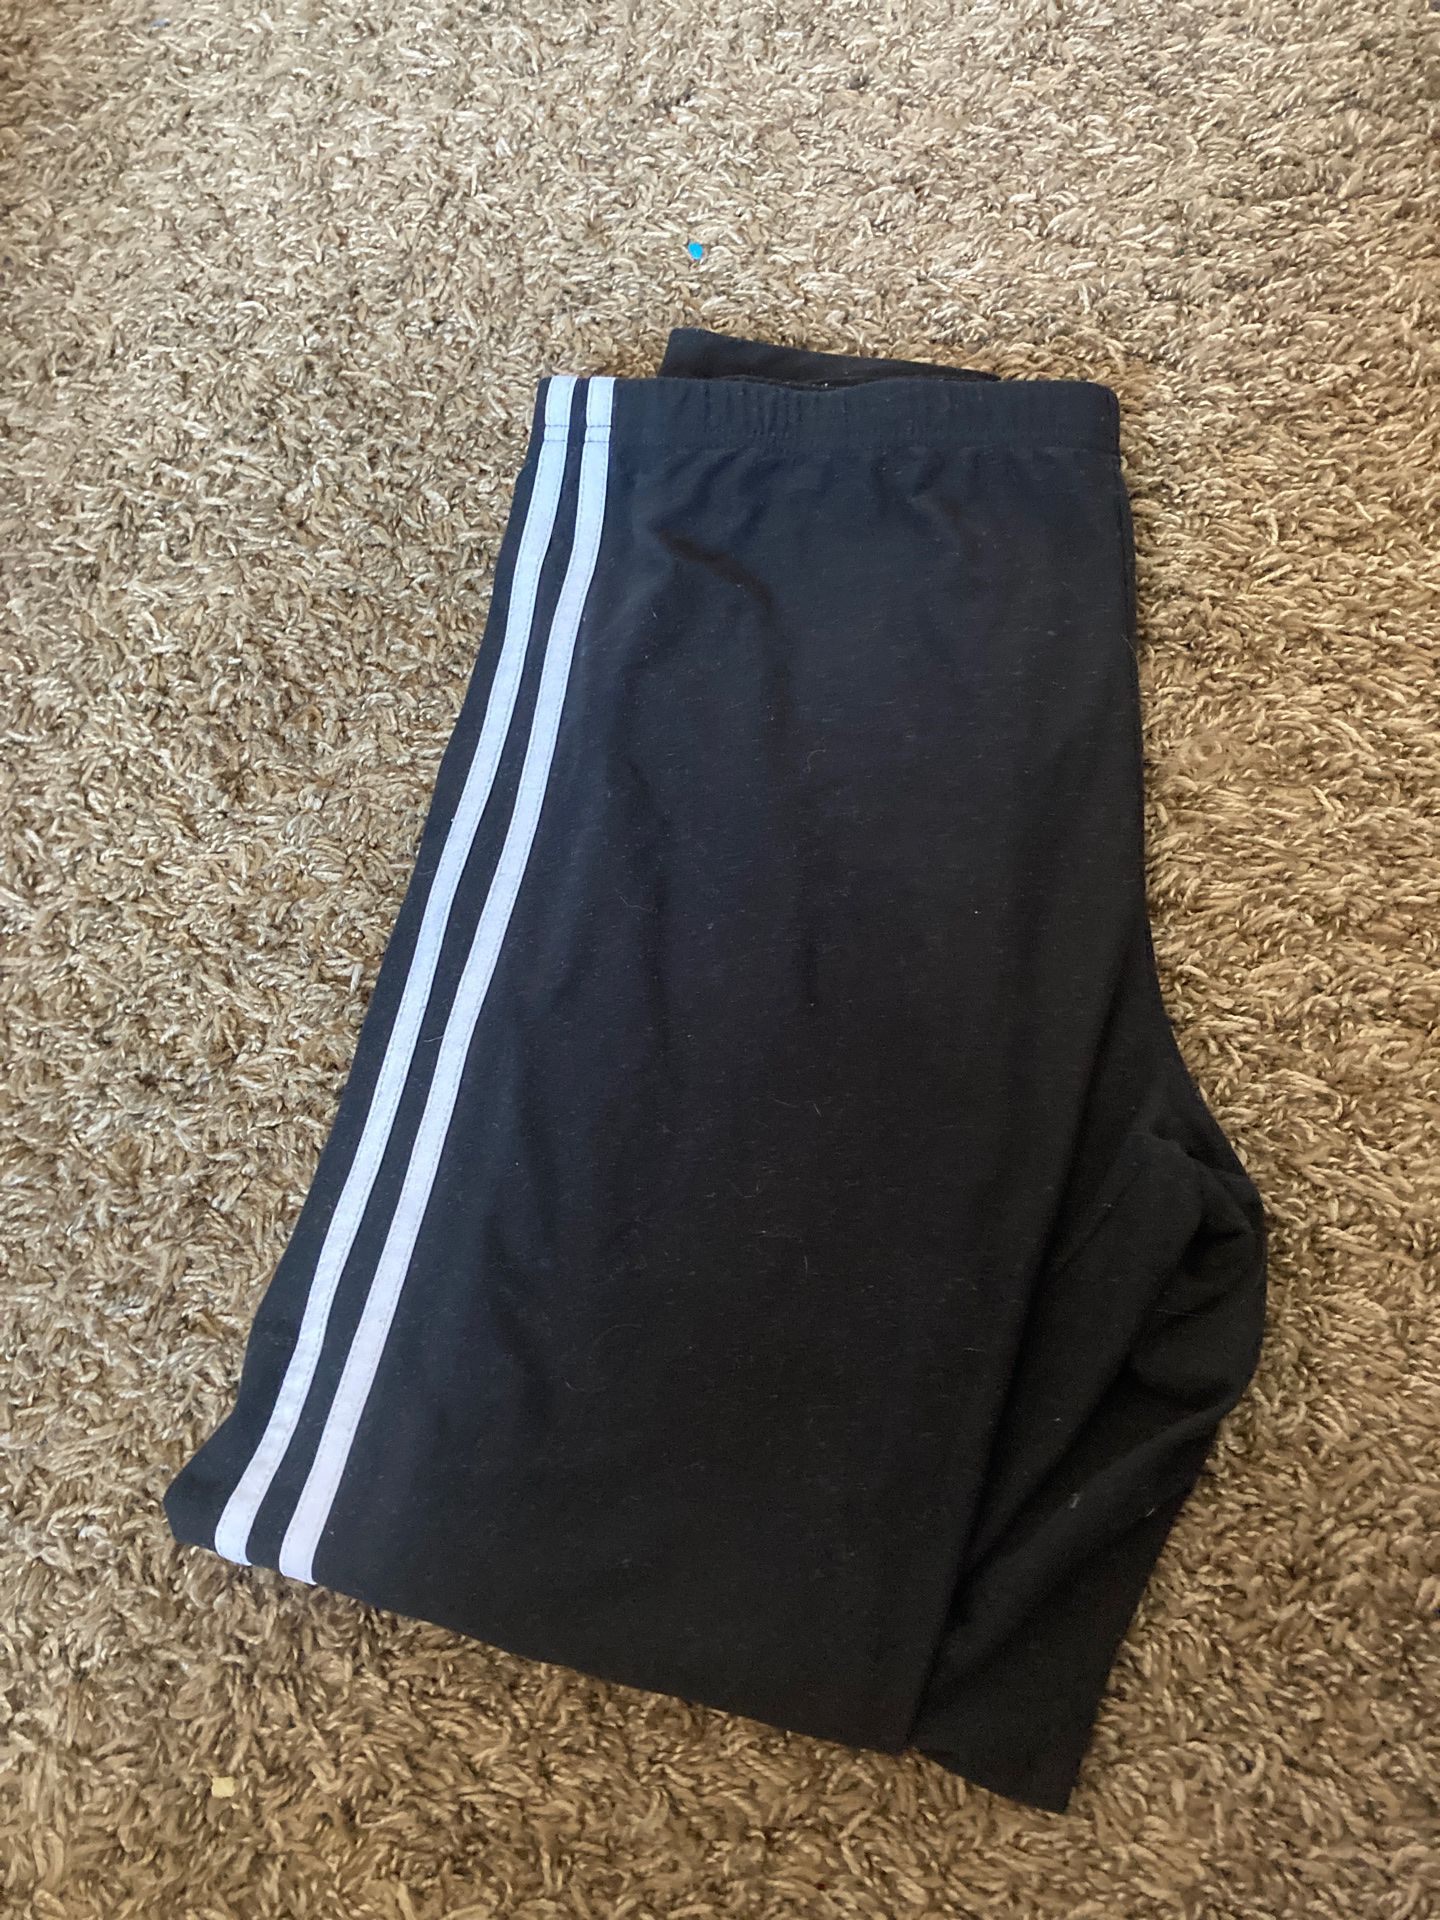 Black leggings with two white lines down leg size extra-large